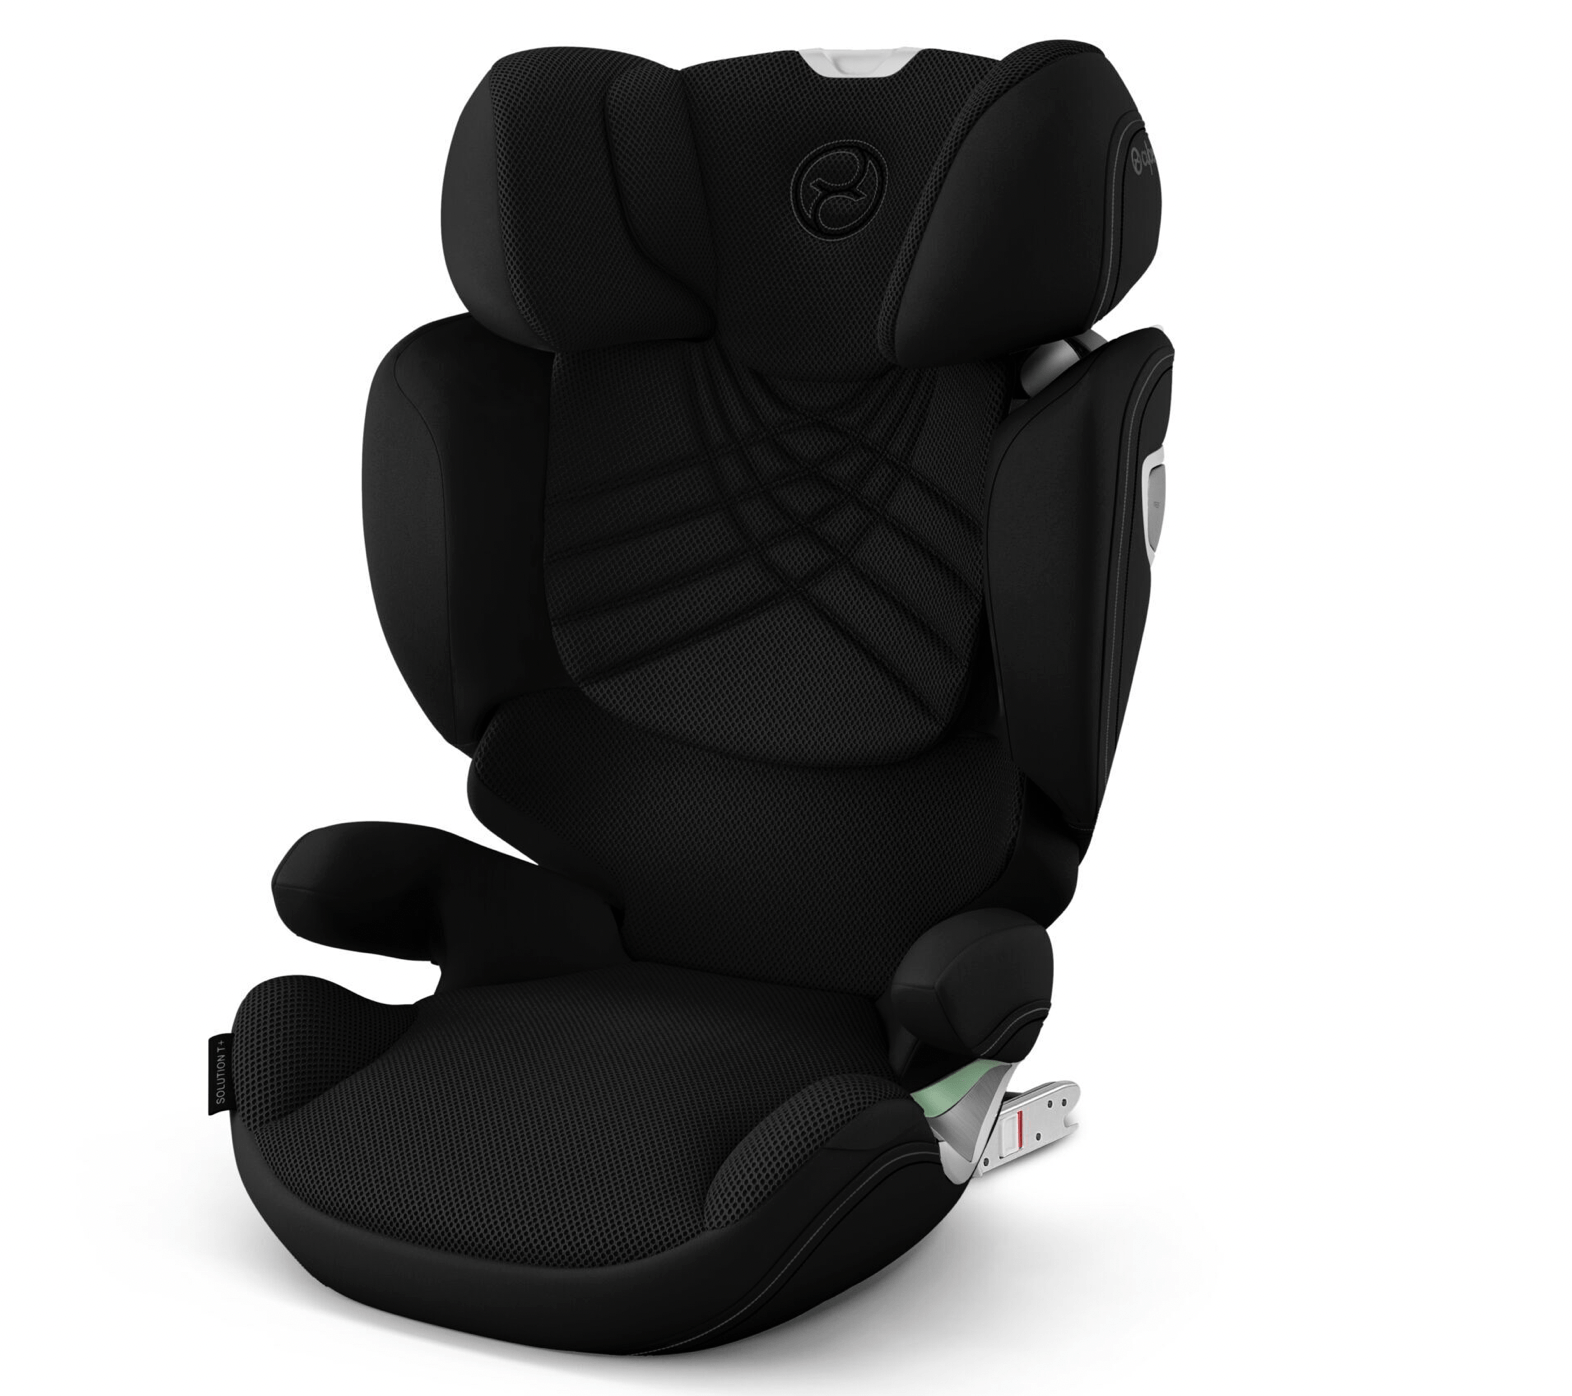 Budget Car Seat Cushion A Comprehensive Guide to Comfort and Support